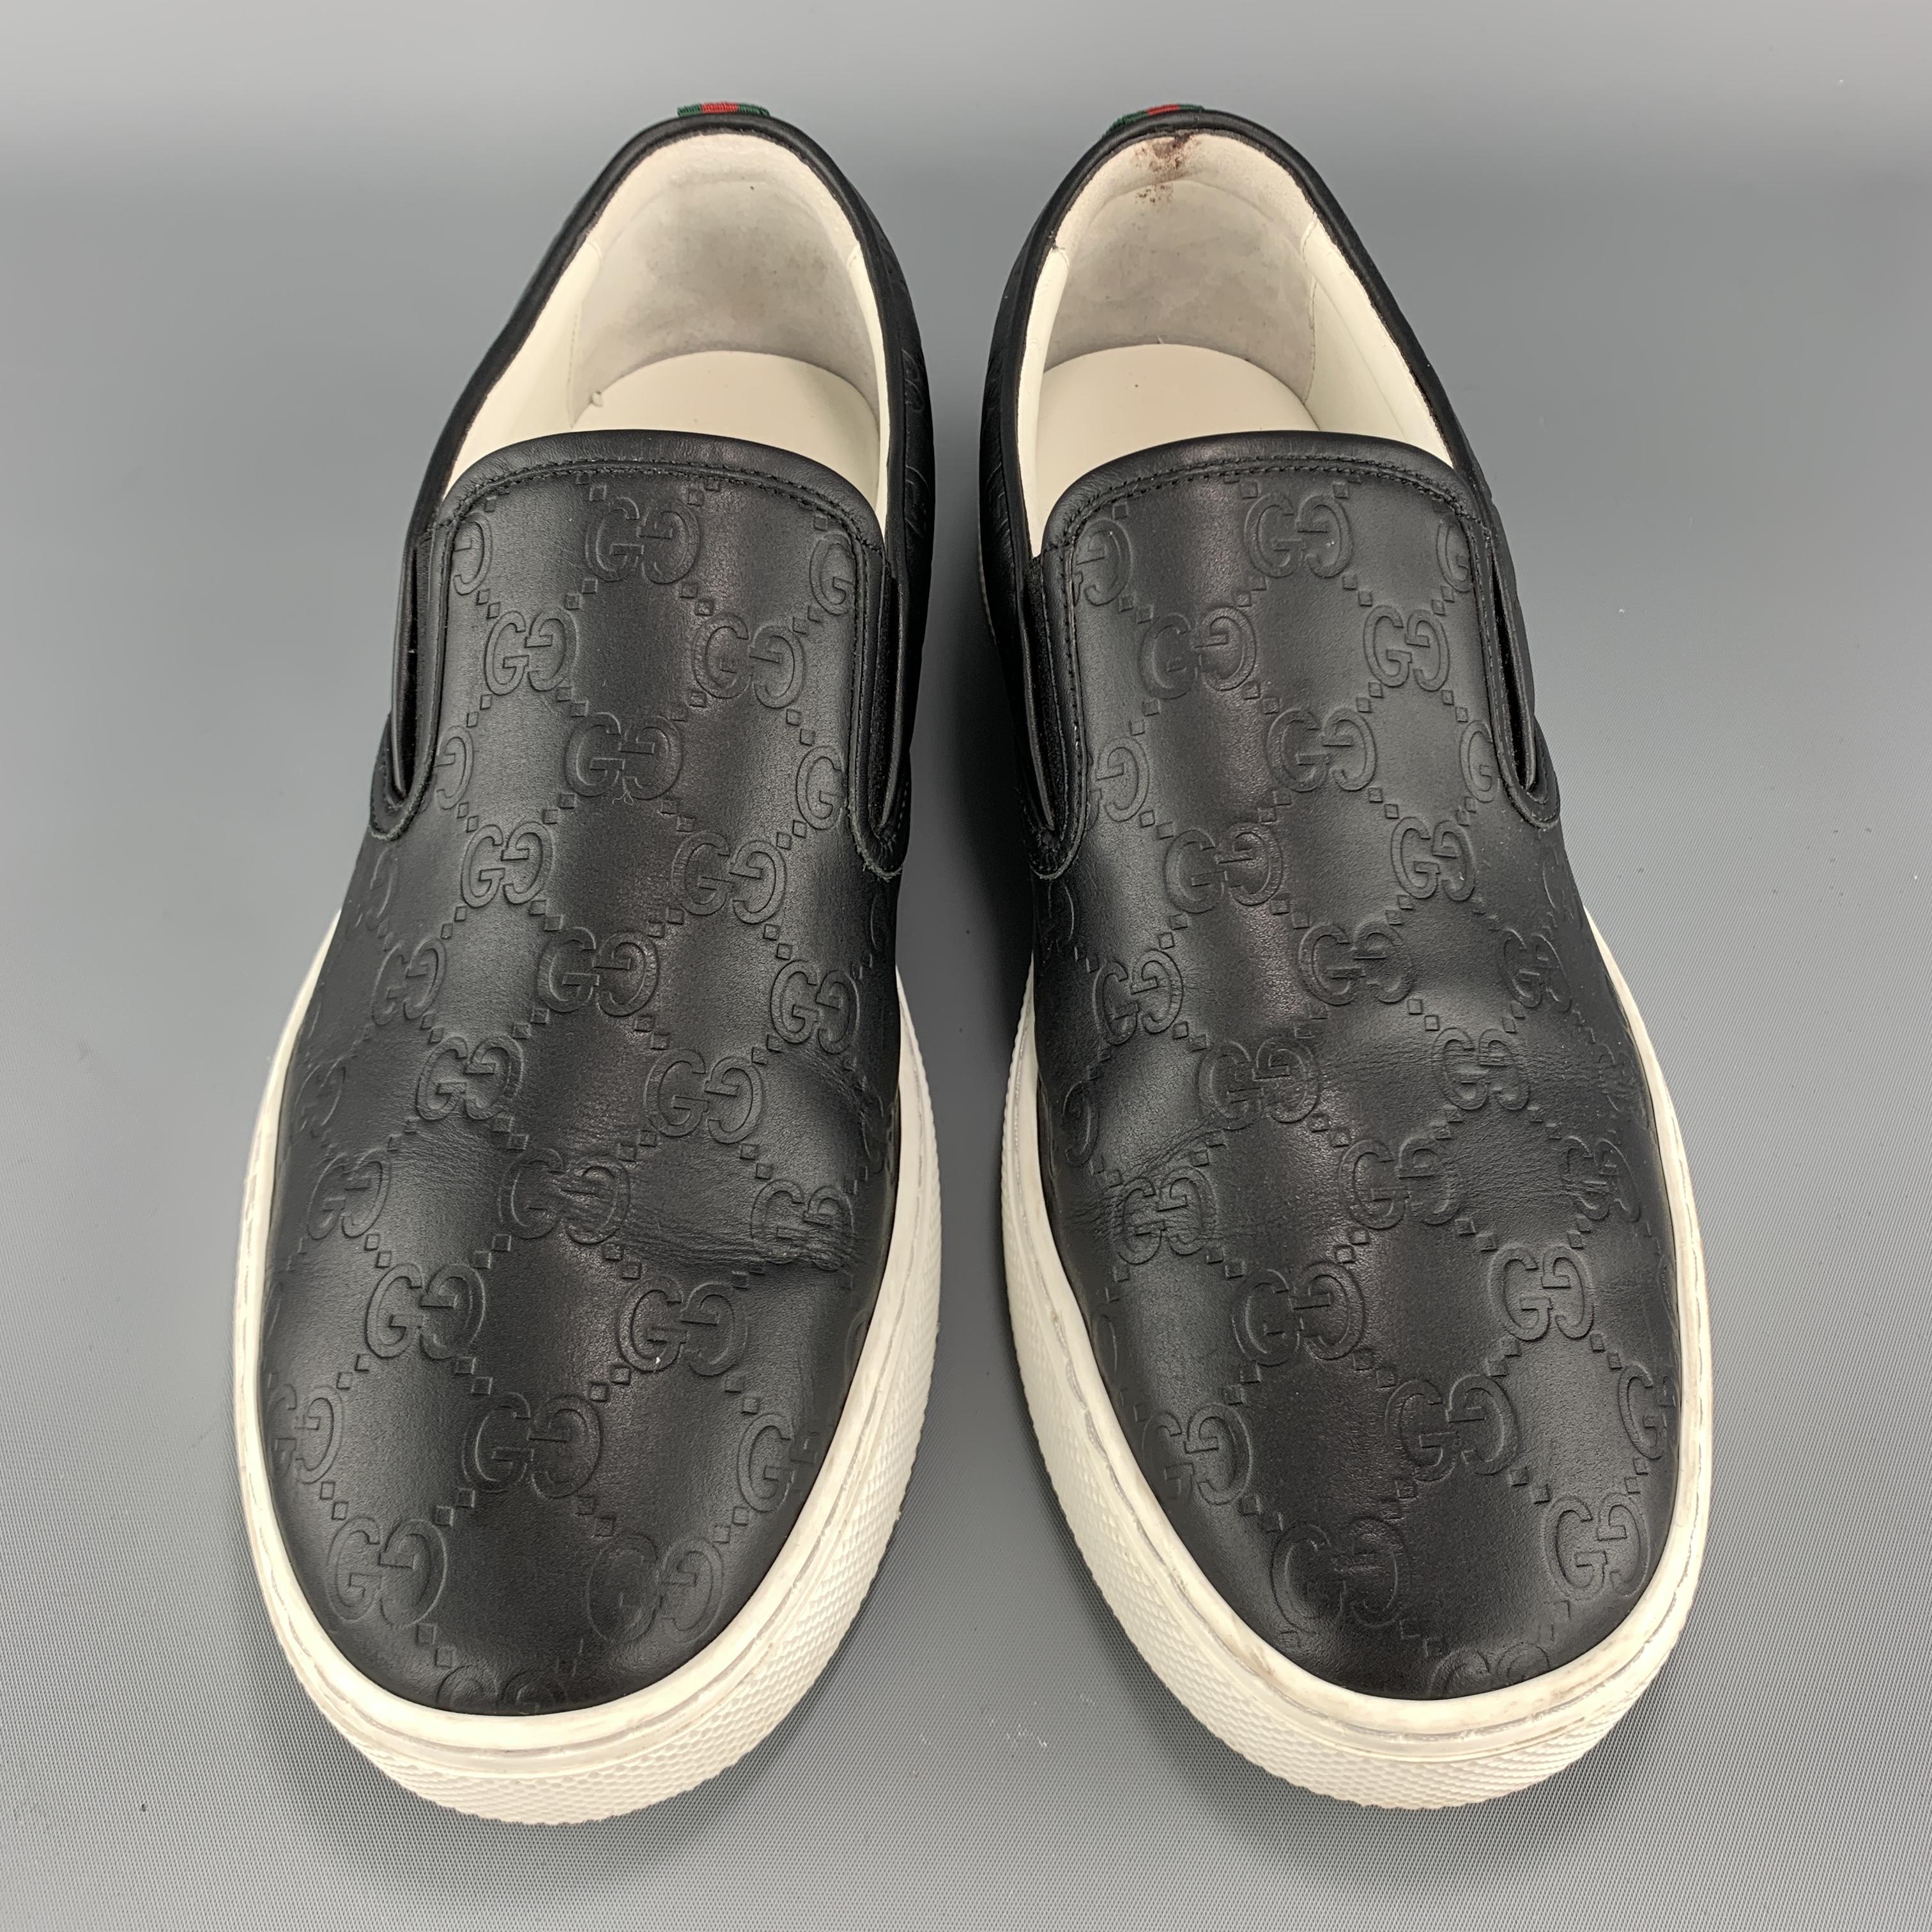 GUCCI slip on sneakers come in black Guccissima monogram embossed leather with a white rubber sole and signature stripe webbing back detail. Made in Italy.

Excellent Pre-Owned Condition.
Marked: UK 9.5

Outsole: 11.75 x 4.25 in. 